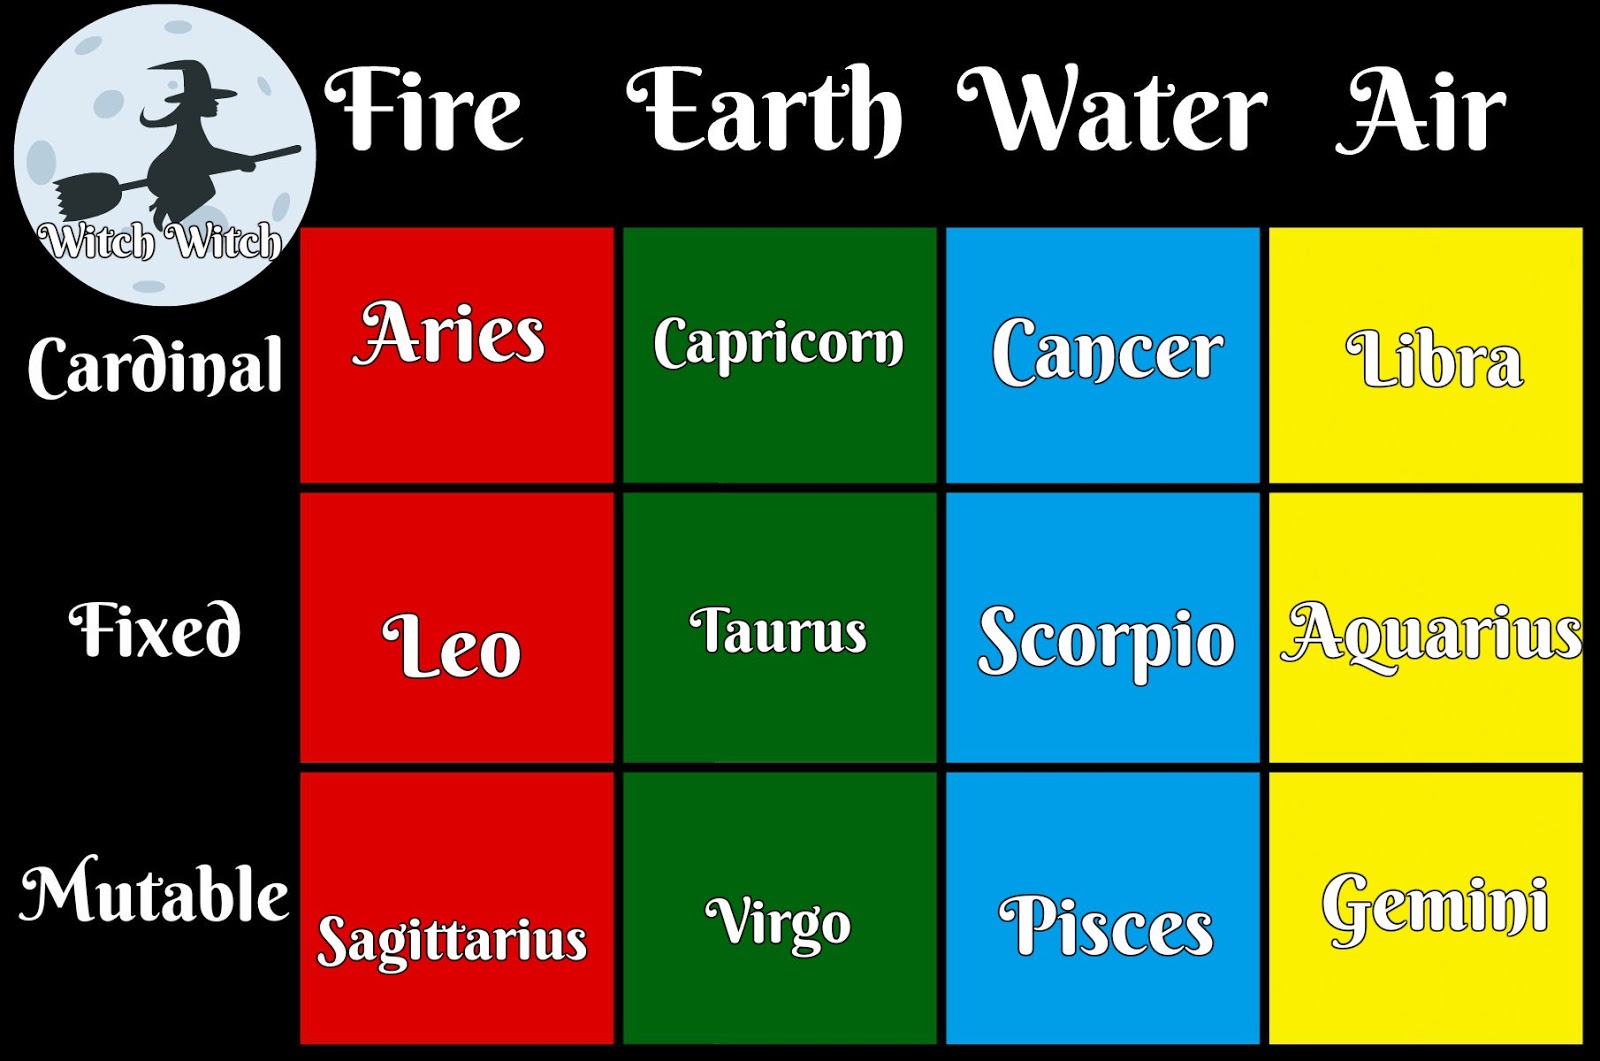 Mutable fire sign